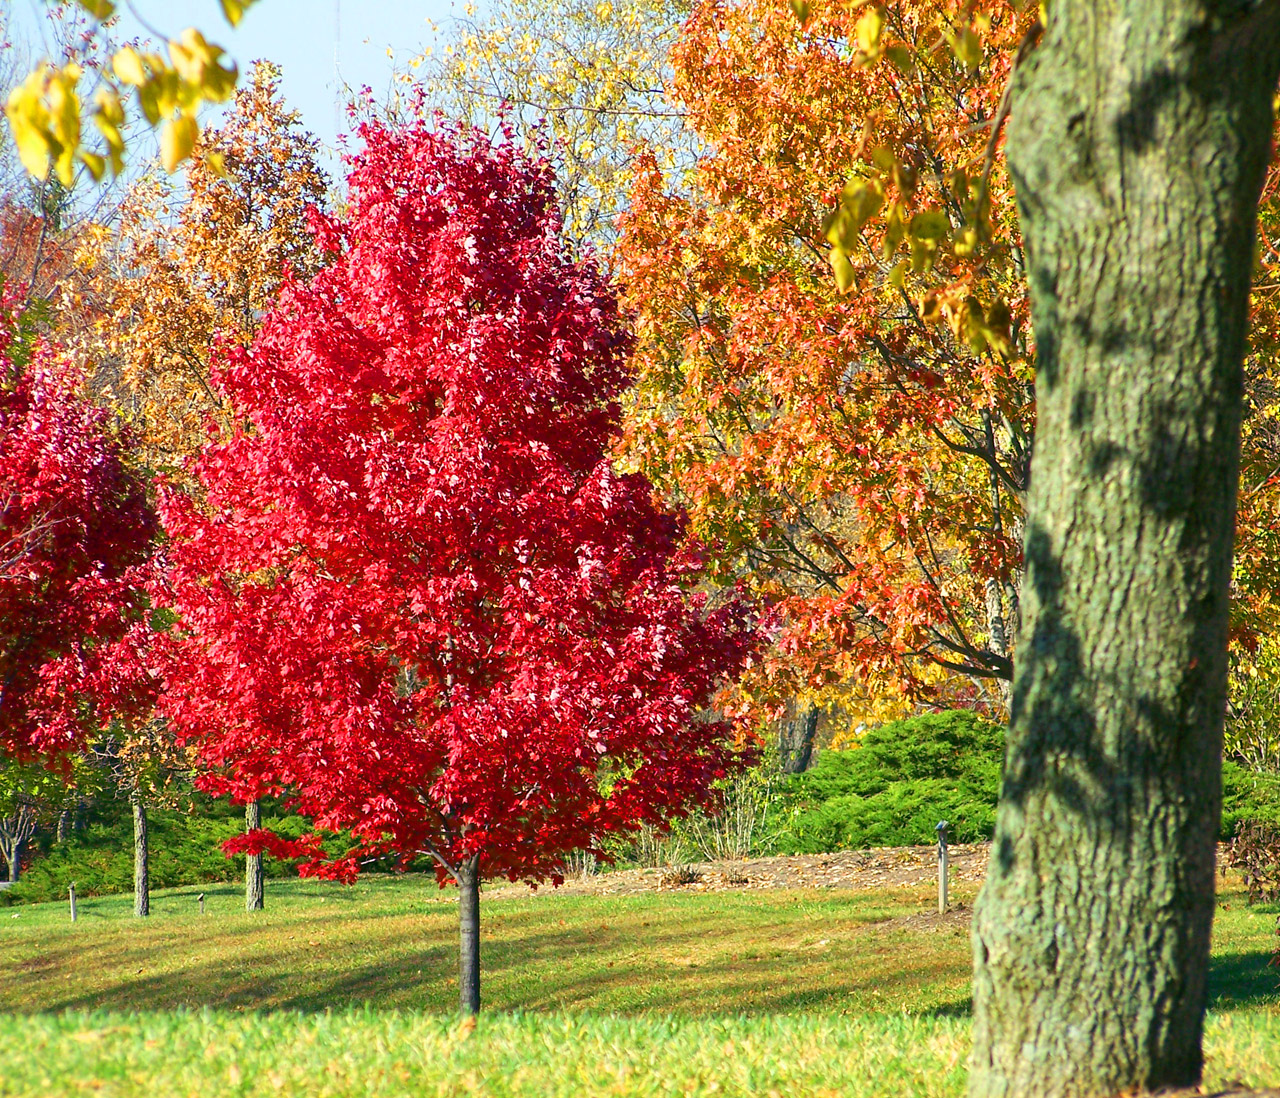 Colored leaves on trees in the fall